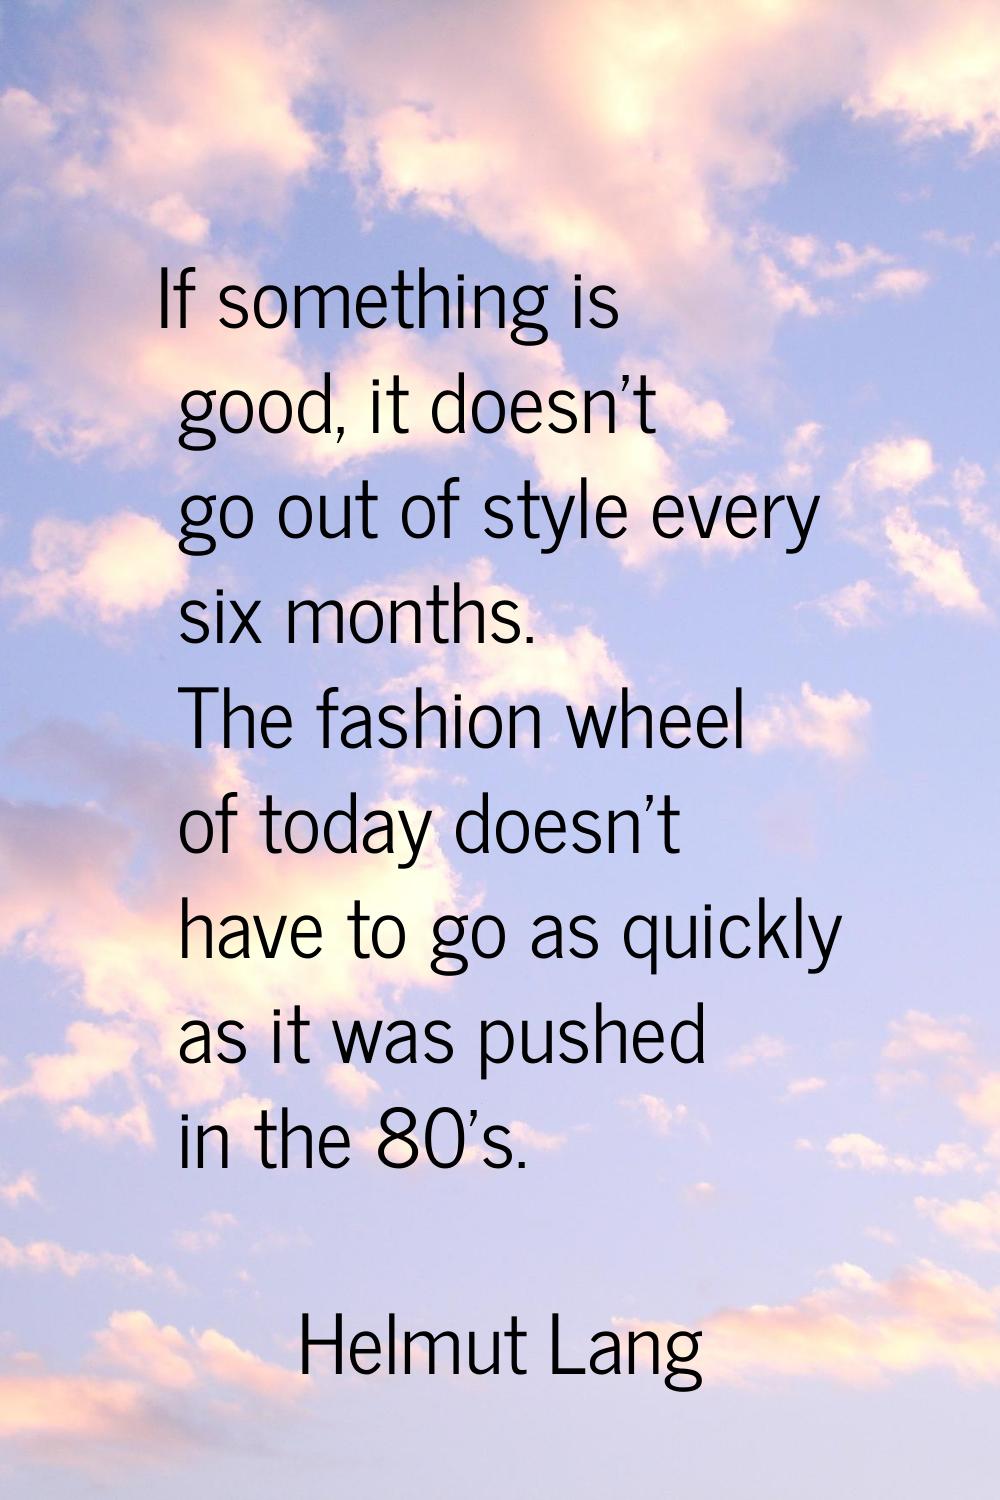 If something is good, it doesn't go out of style every six months. The fashion wheel of today doesn